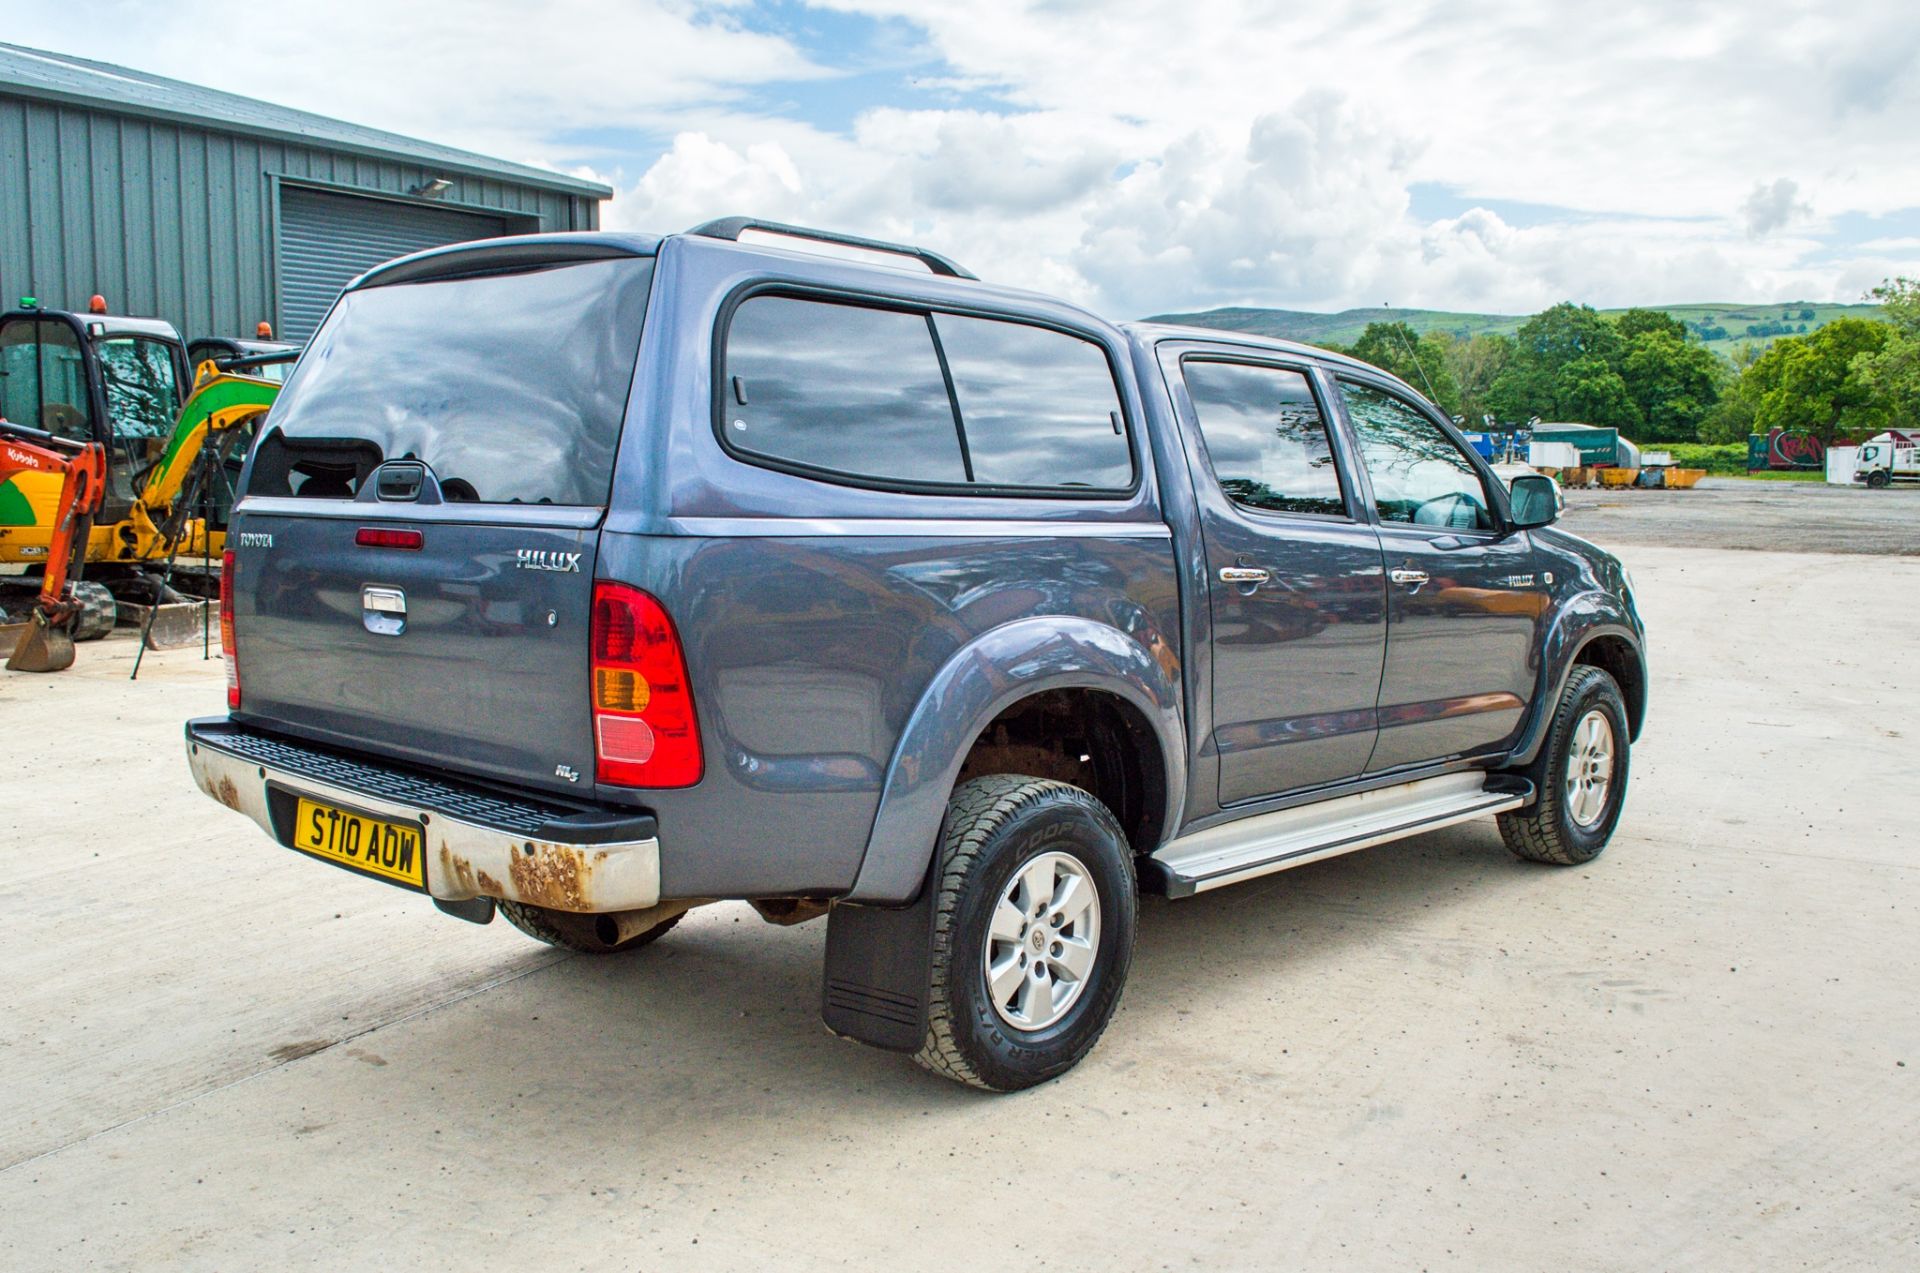 Toyota Hilux 2.5 D-4D 144 HL3 4wd manual double cab pick up Reg No: ST10 AOW Date of Registration: - Image 3 of 25